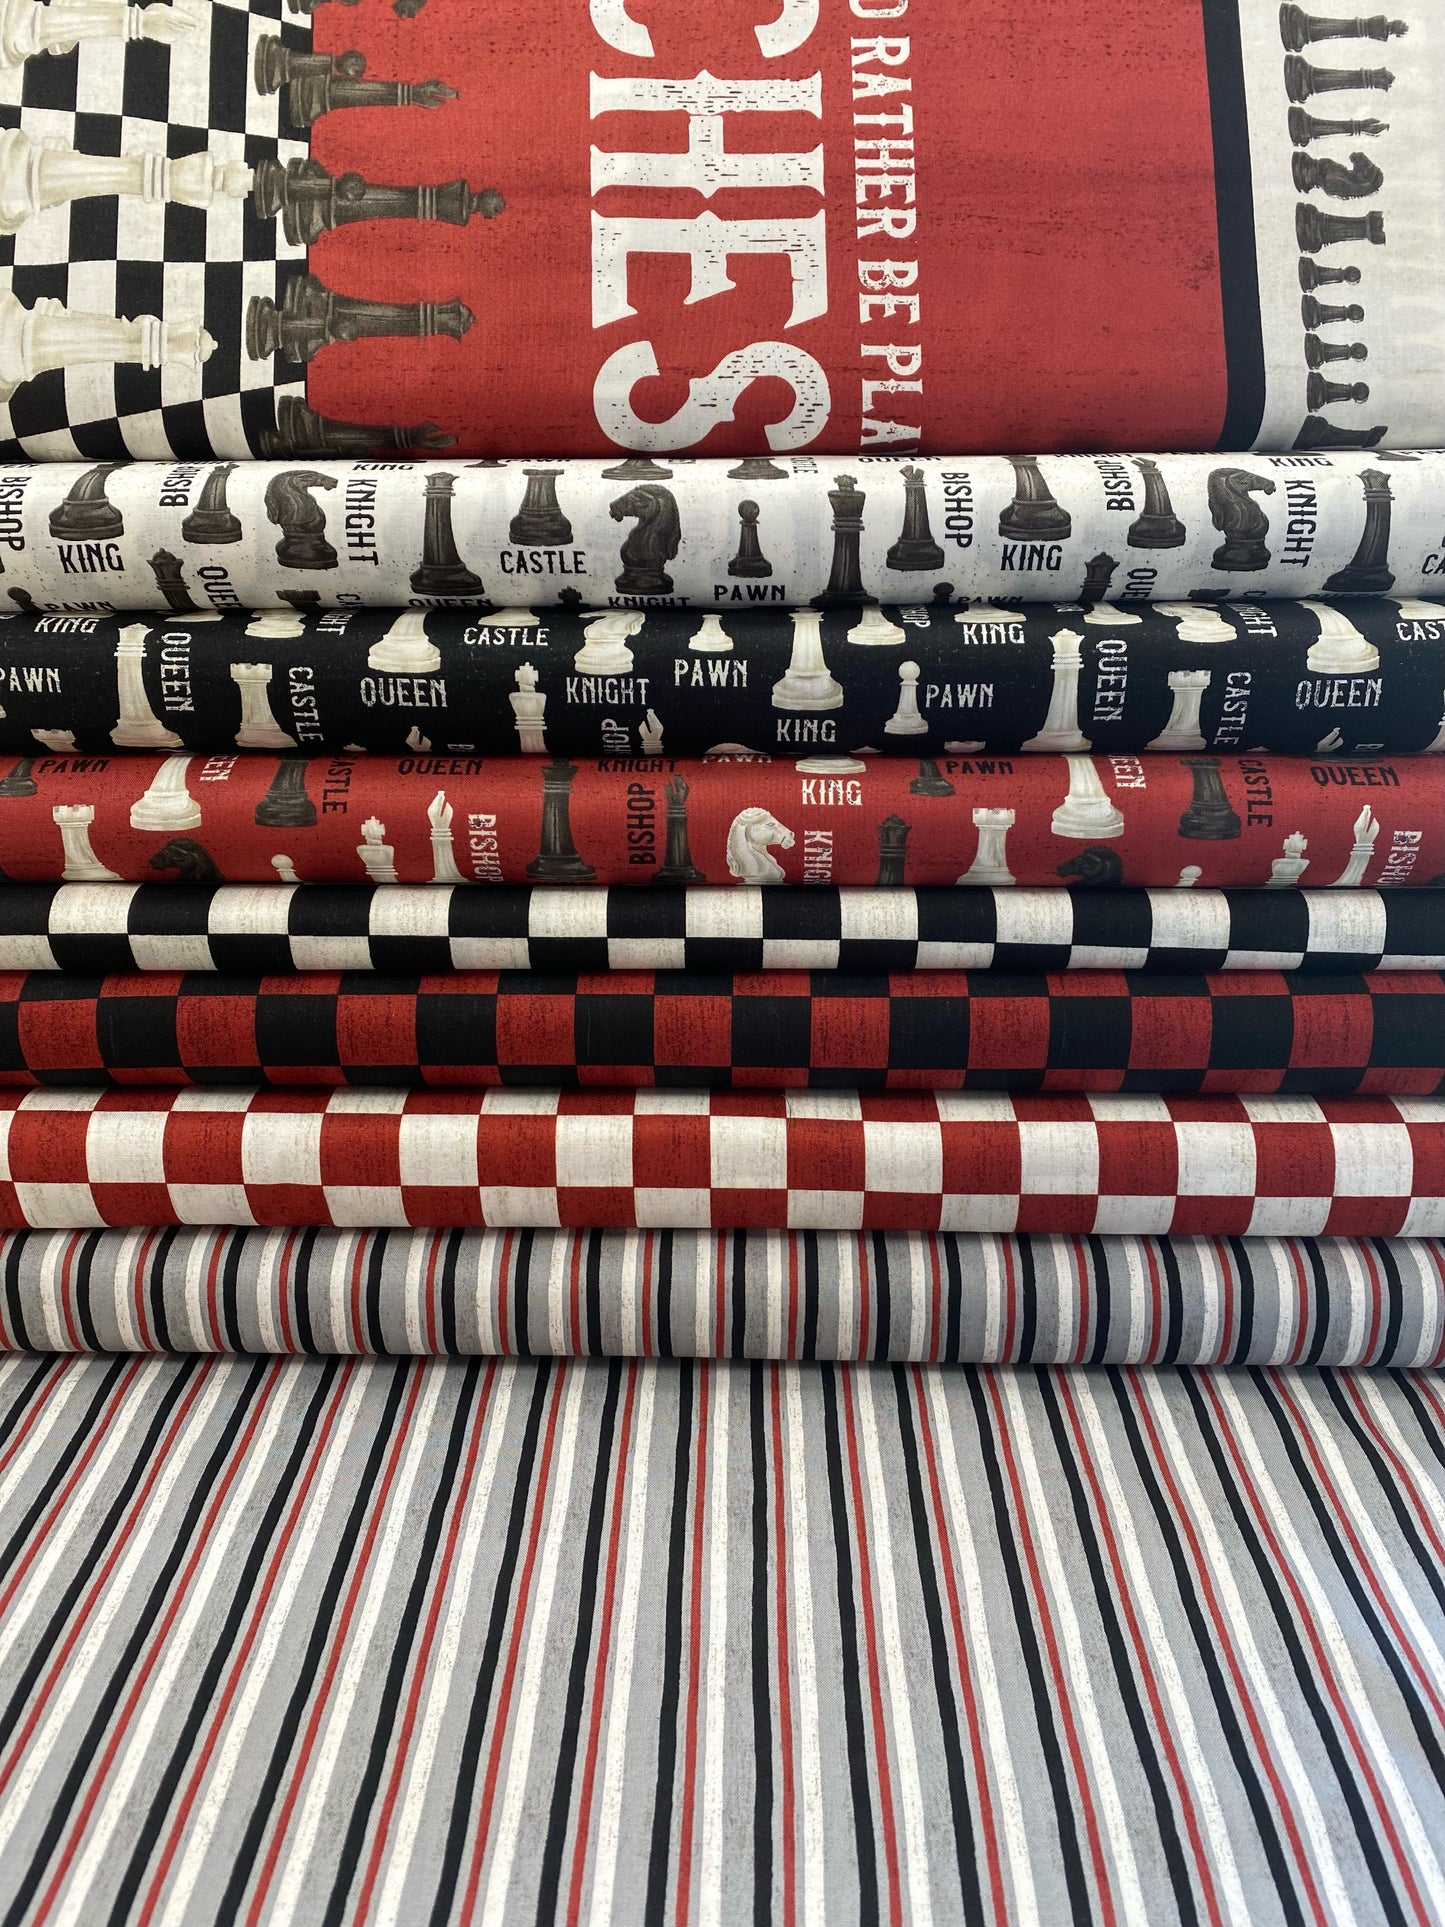 I'd Rather Be Playing Chess by Tara Reed Pieces White     C11260-OFFWHITE Cotton Woven Fabric